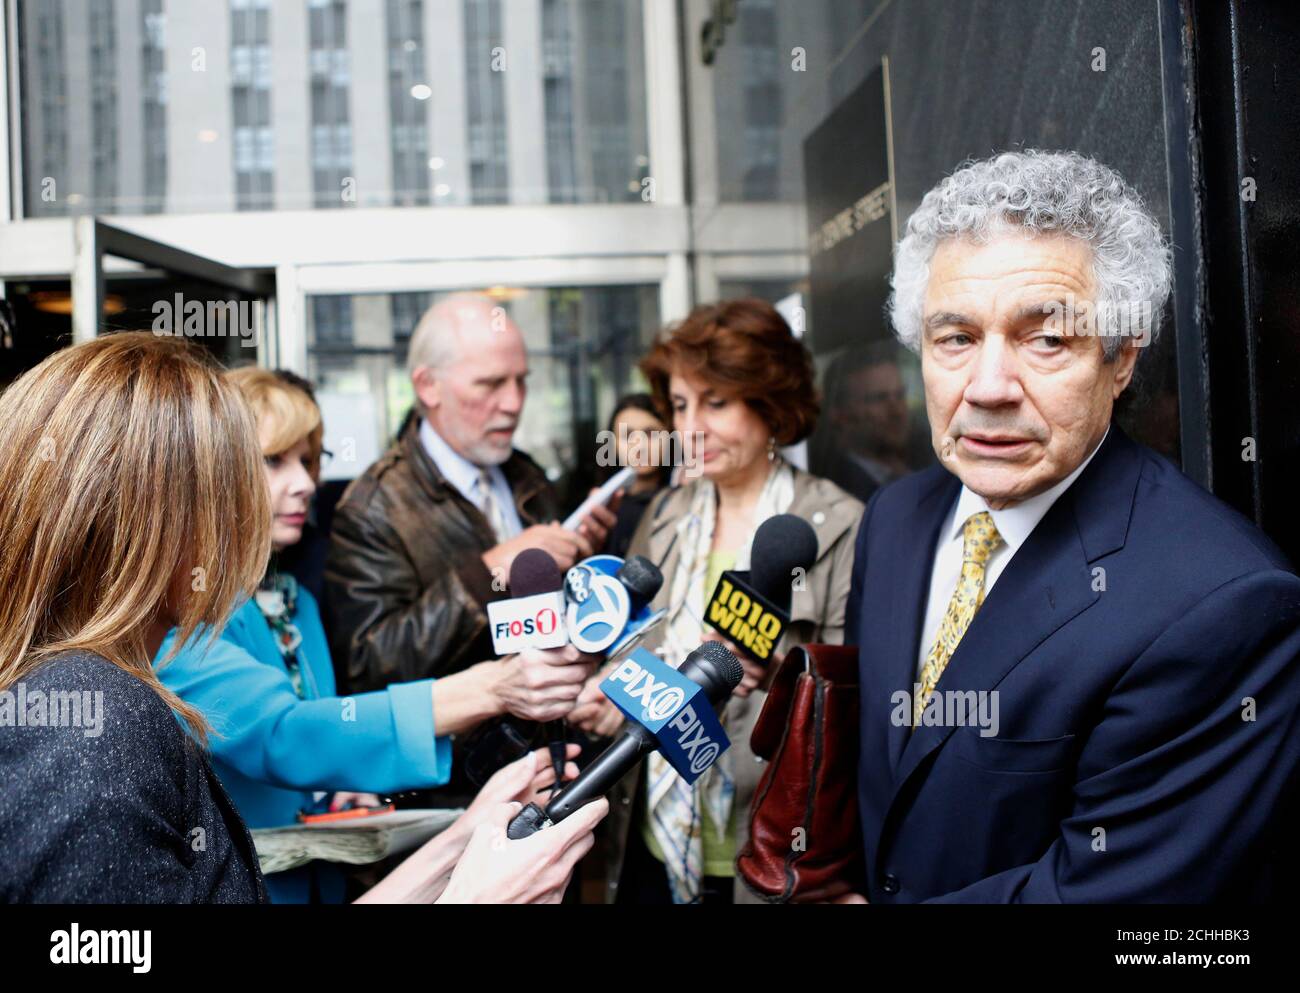 Harvey Fishbein (R), an attorney for Pedro Hernandez, speaks to the press following a hearing outside the state Supreme Court in the Manhattan borough of New York, May 15, 2013. Hernandez who confessed to the 1979 killing of Etan Patz should stand trial for murder and kidnapping in the 6-year-old boy's disappearance, a judge ruled on Wednesday. An attorney for Hernandez, 51, of Maple Shade, New Jersey, had asked the judge to throw out the indictment, arguing that the confession alone was not legally sufficient to support the charges. REUTERS/Brendan McDermid (UNITED STATES - Tags: CRIME LAW) Stock Photo